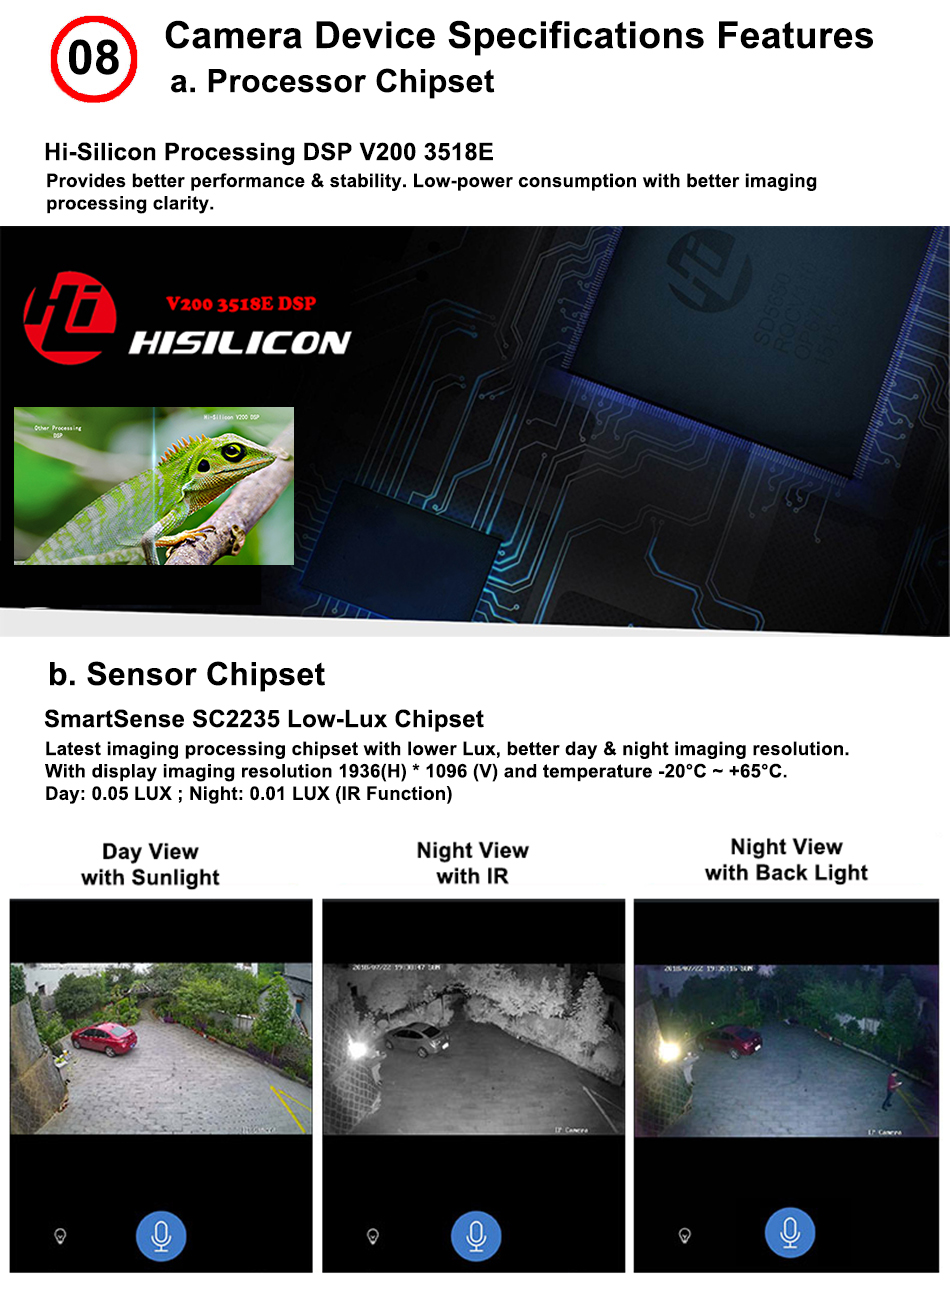 Hisilicon processing DSP Hi3518EV200, provides better profermance and stability. Low power consumption with better imaging processing clarity. SmartSens SC2235 low-lux CMOS image sensor with lower lux, better day & night imaging resolution.